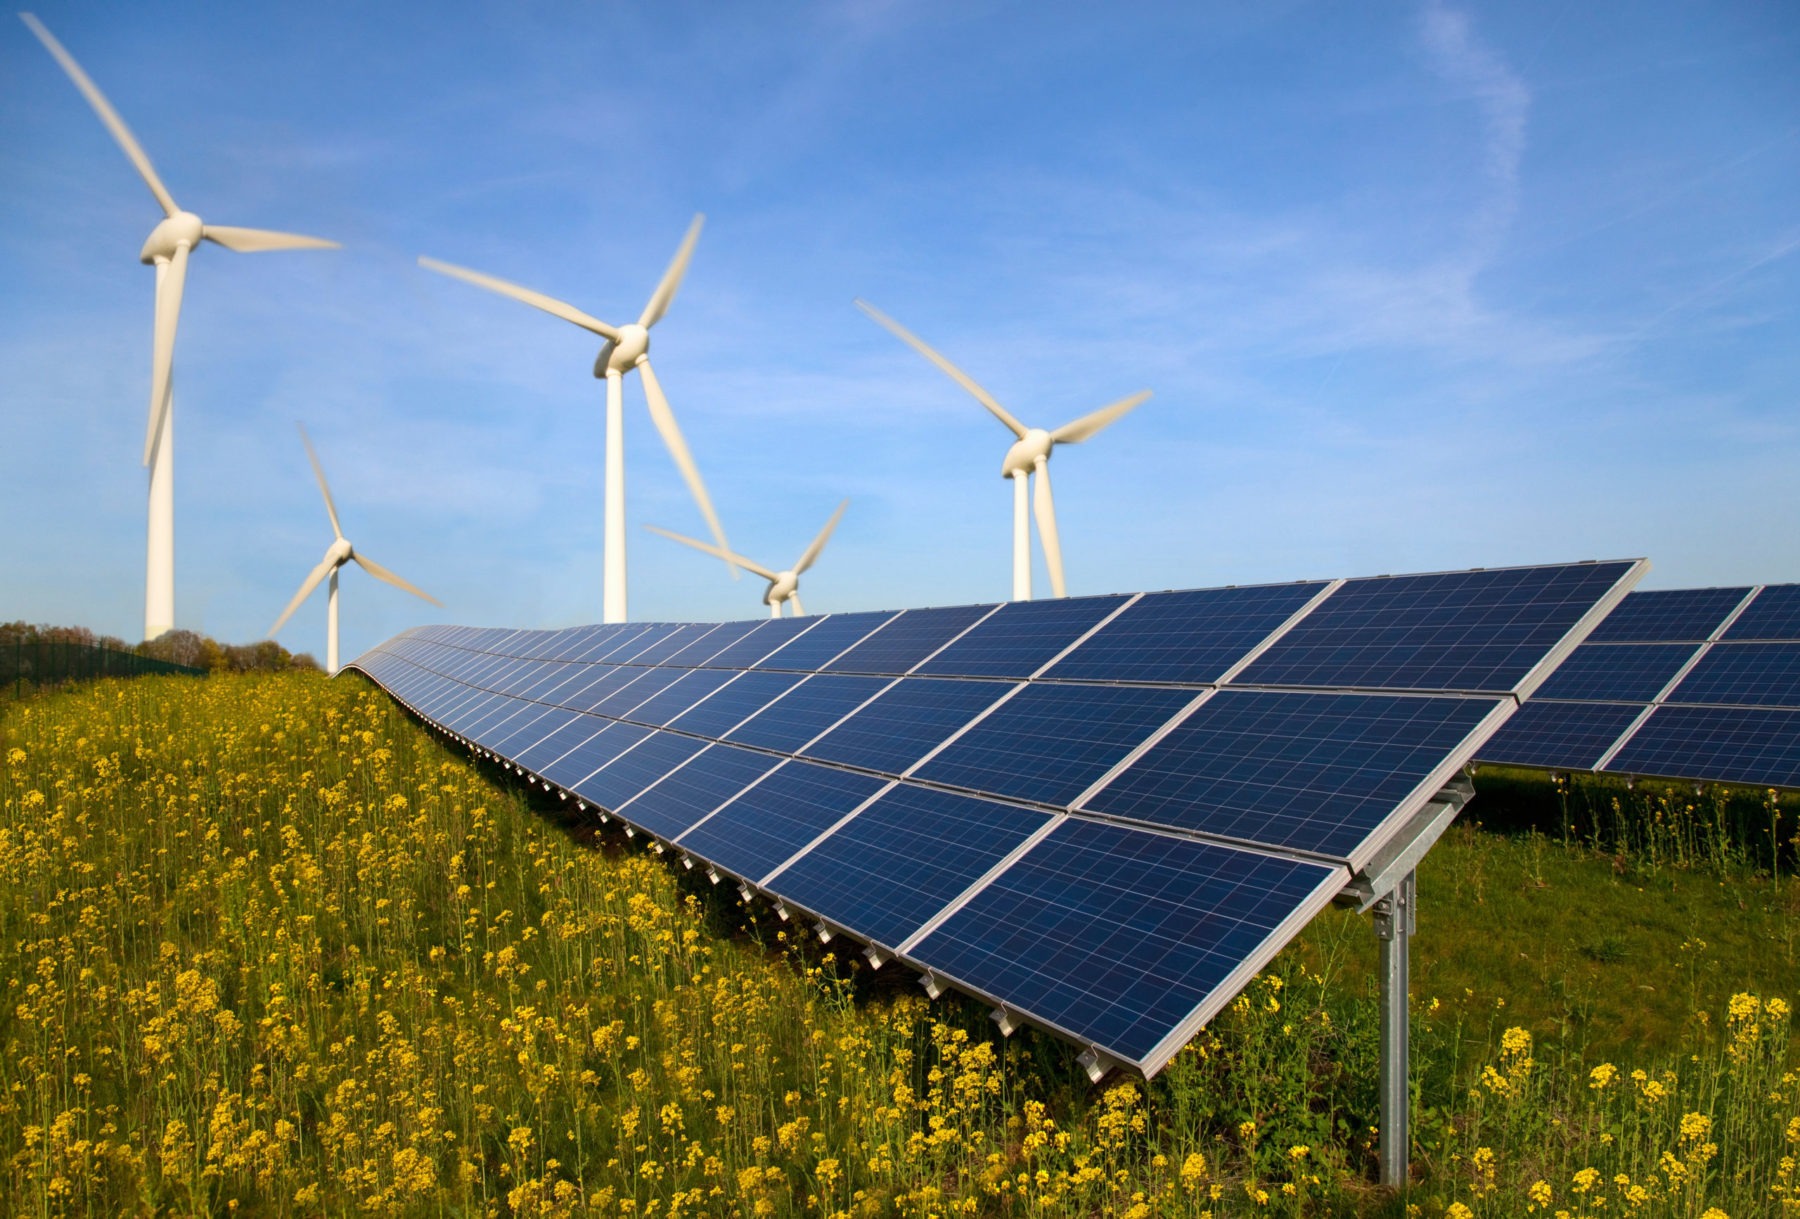 Solar panels and wind turbines in field